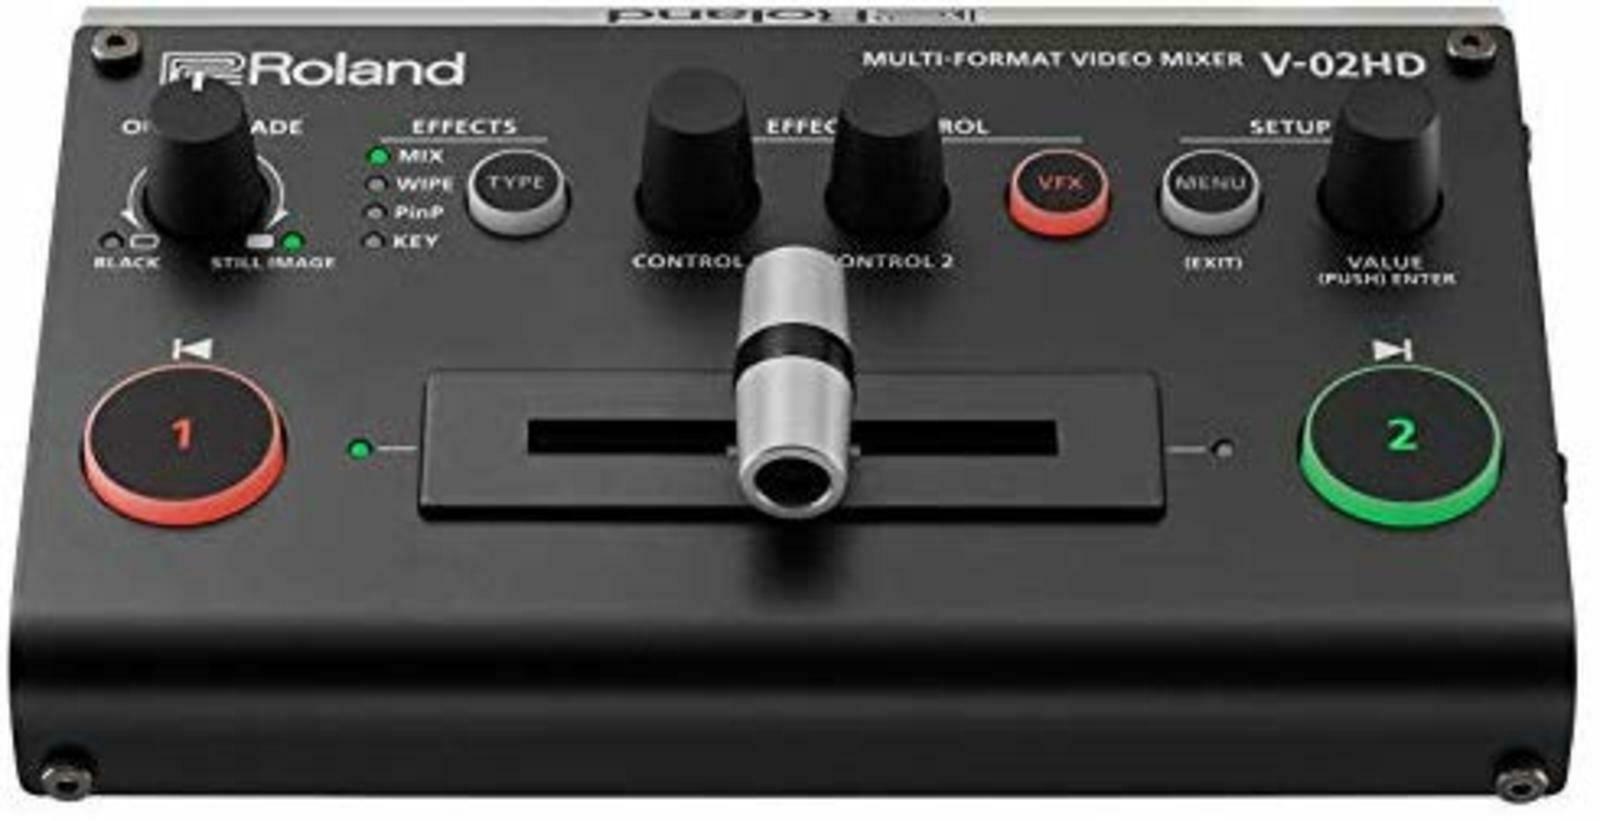 Roland Multi-format Video Mixer V-02hd Video Switcher F/s W/tracking# Japan New